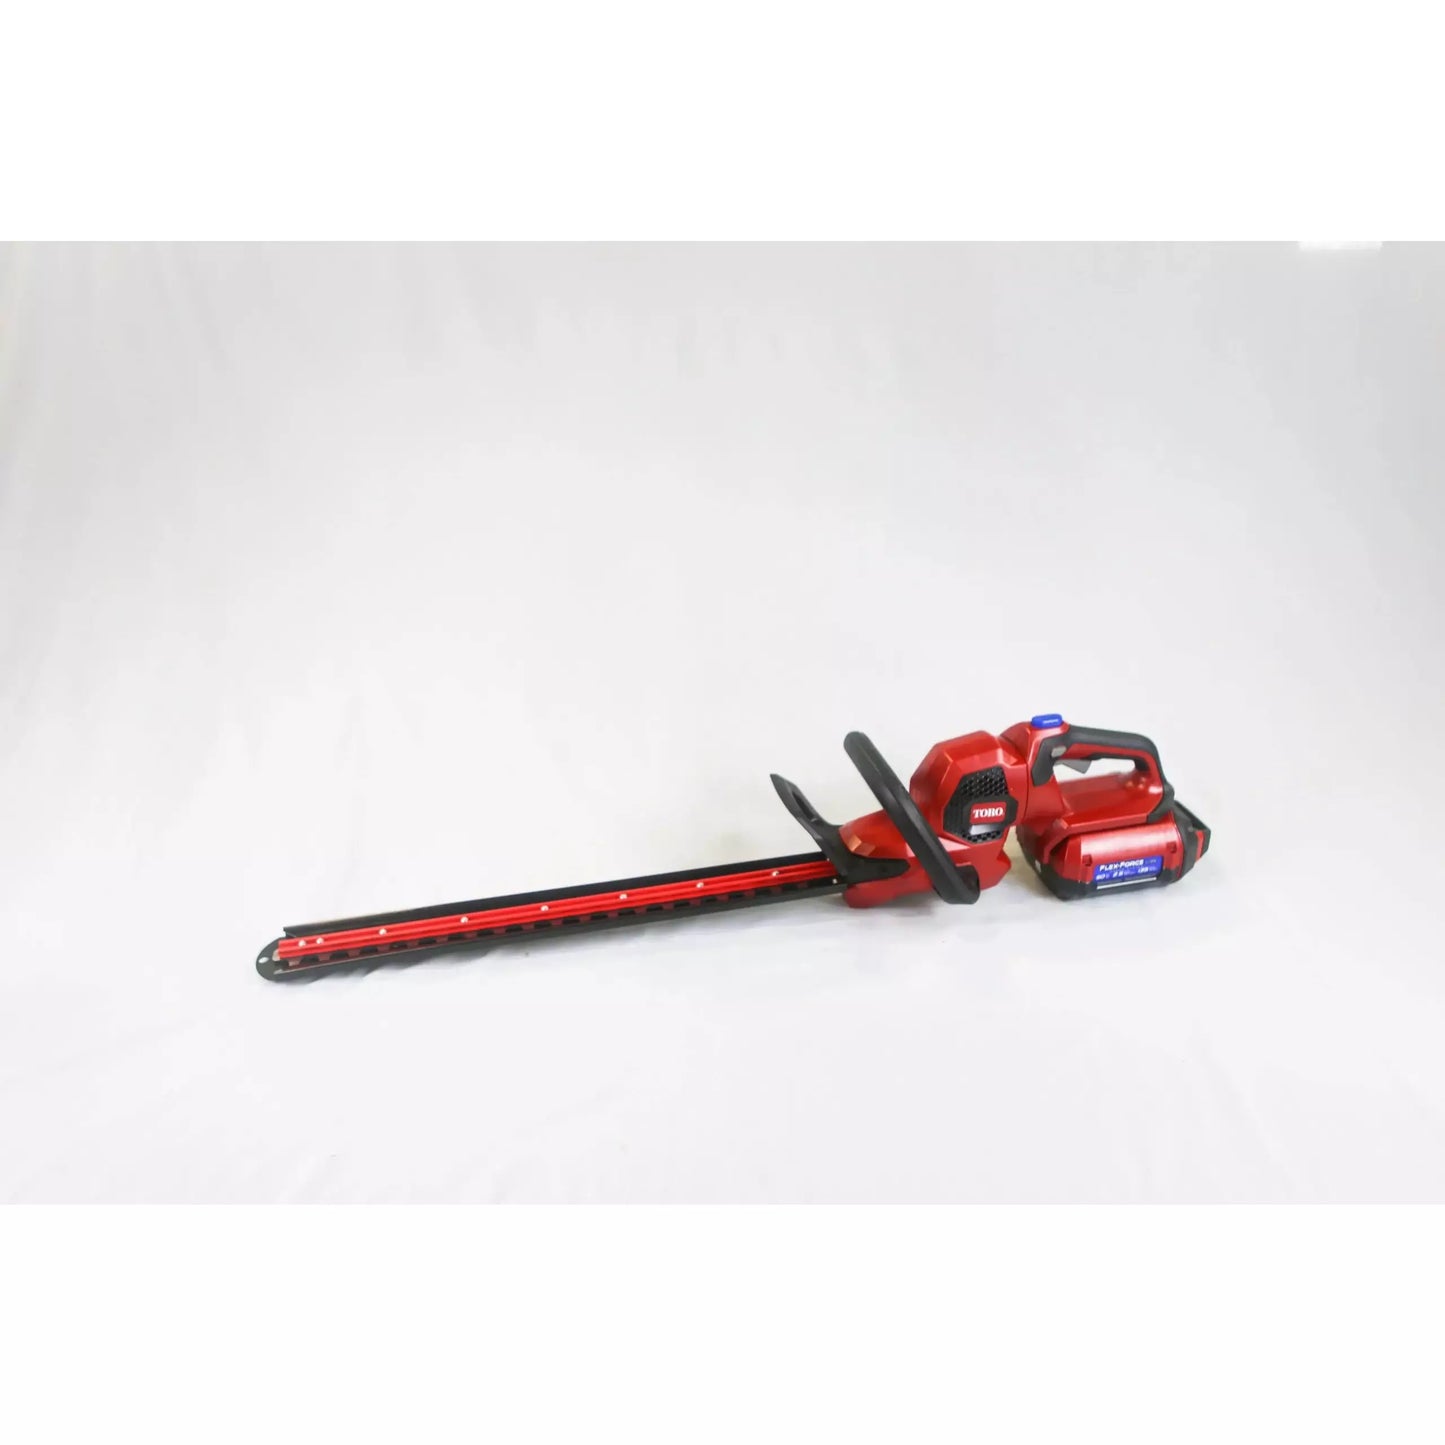 60V MAX 24" Hedge Trimmer with 2.5Ah Battery